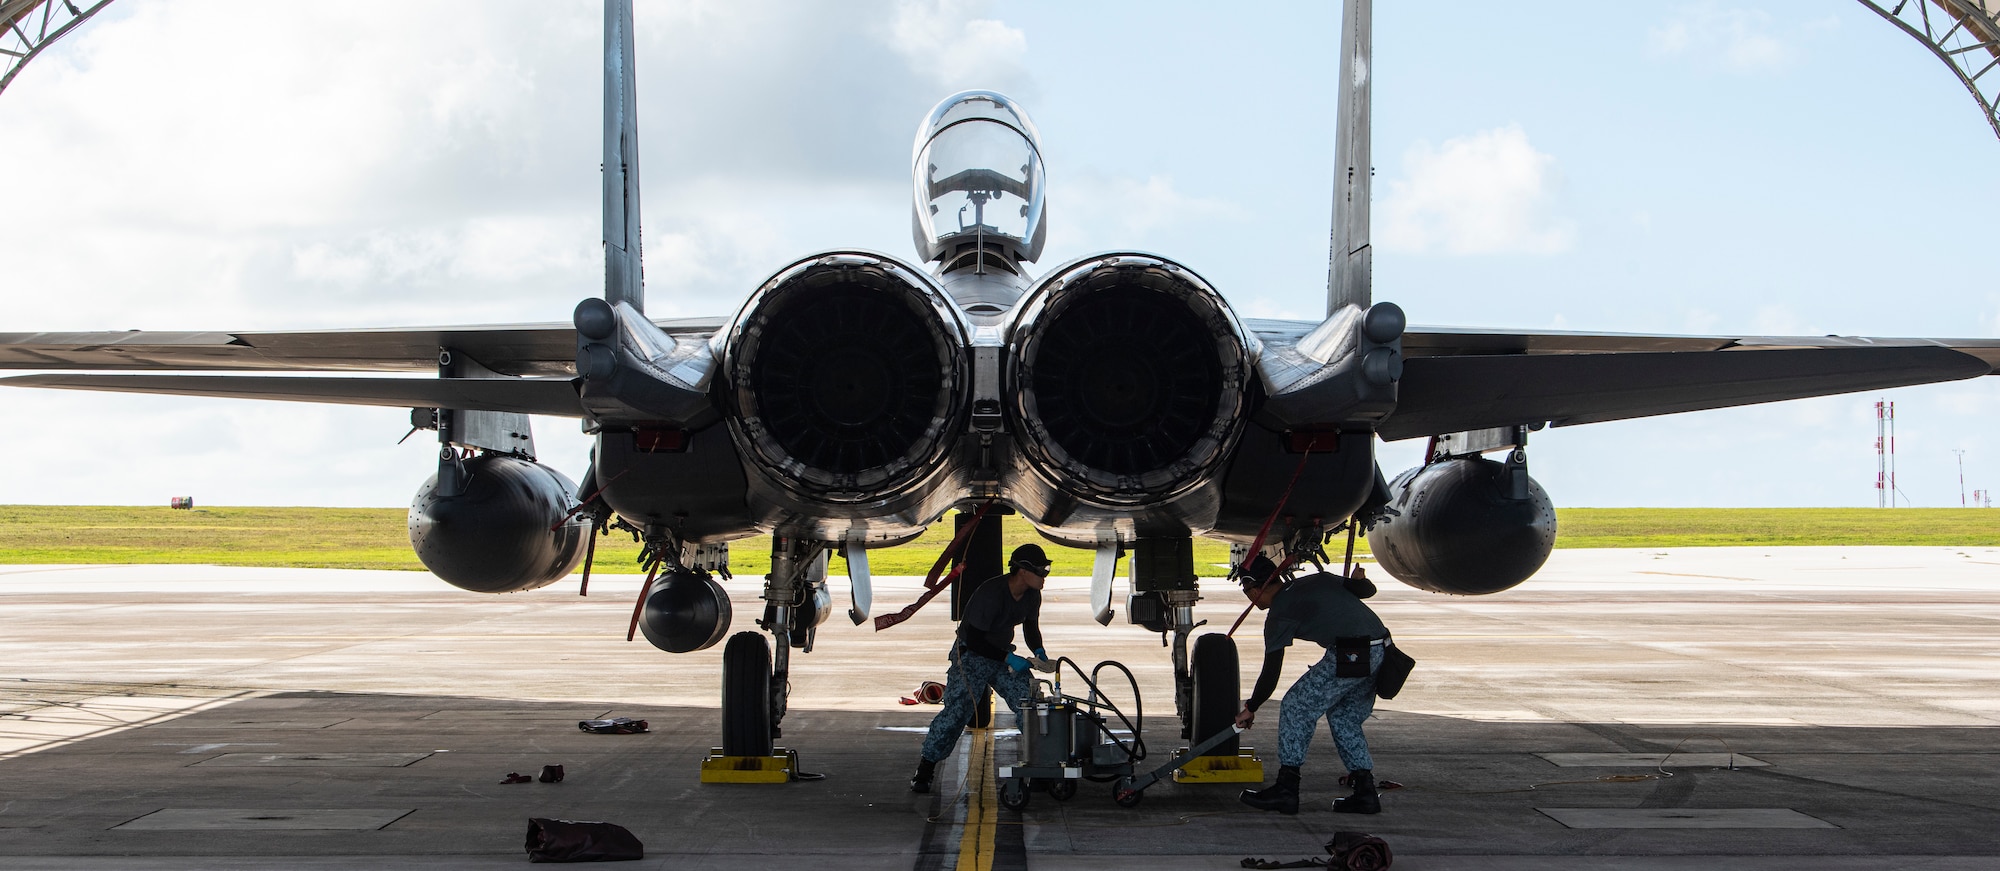 Republic of Singapore air force airmen assigned to the 807 Squadron perform post-flight maintenance on a RSAF F-15SG during a deployment at Andersen Air Force Base, Guam, May 24, 2021. The training opportunity in Guam is a reflection of long-standing bilateral defense relations between Singapore and the U.S.